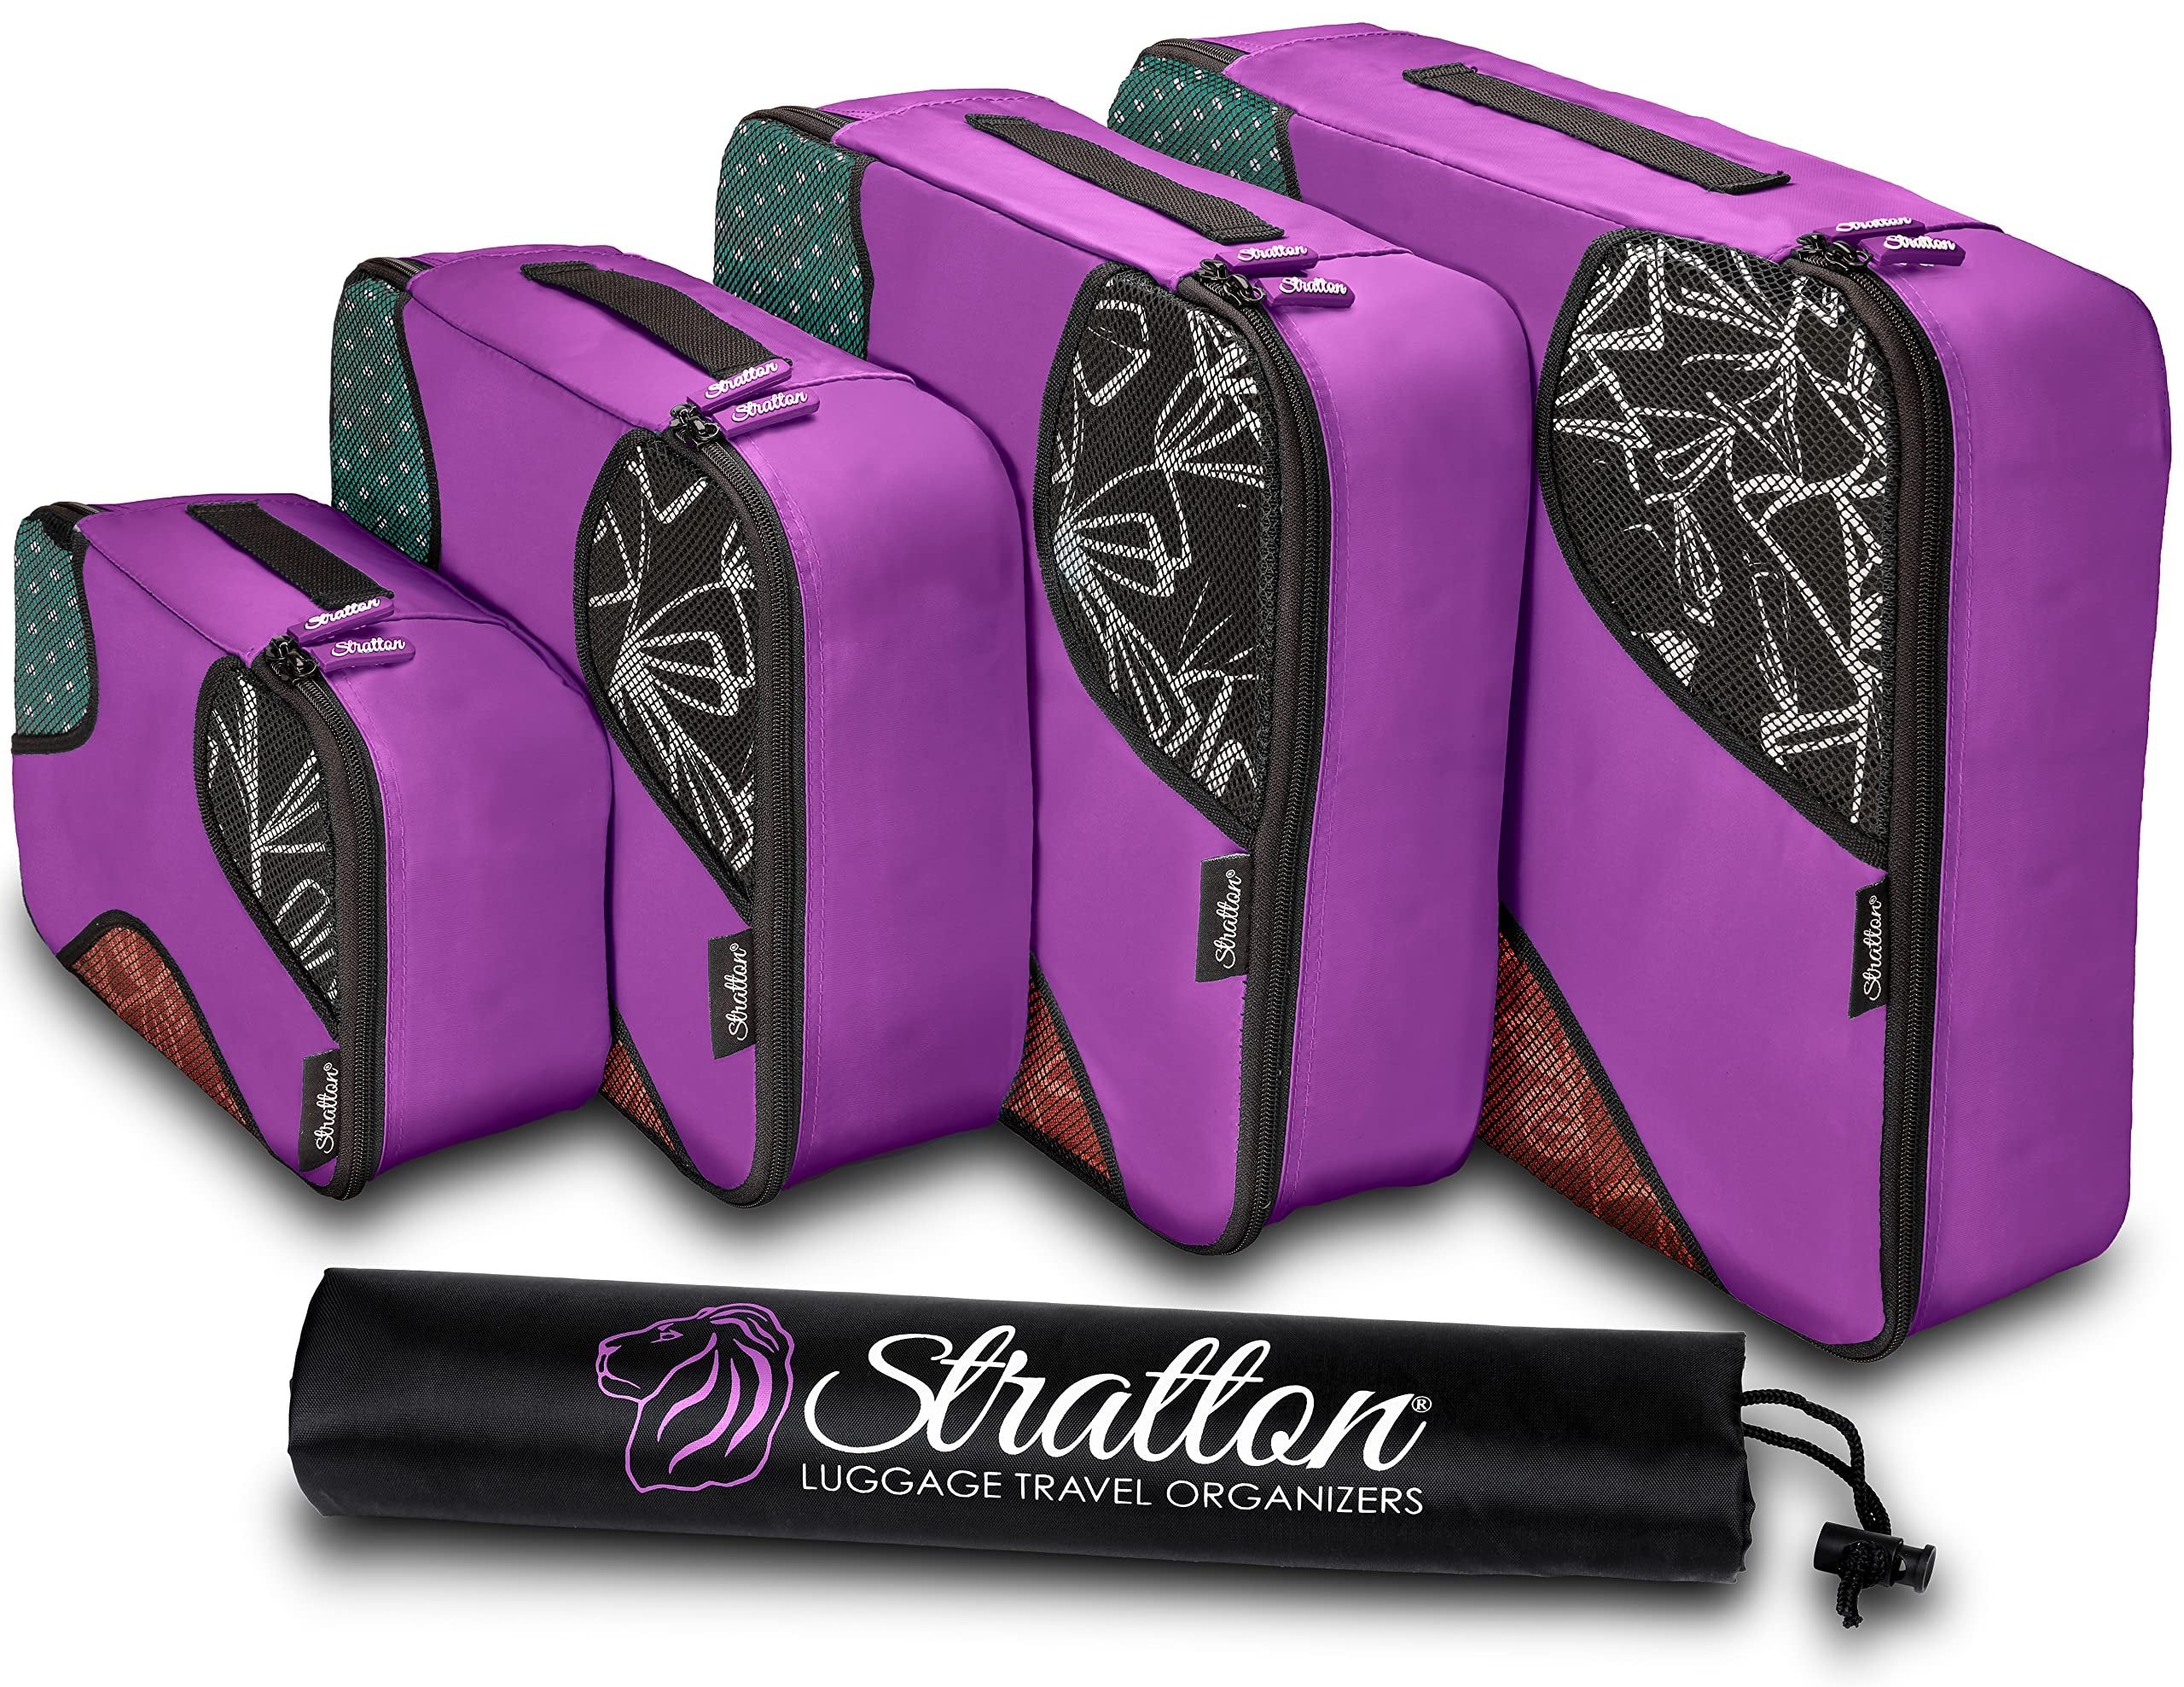 Stratton 5 Set Packing Cubes, Travel Luggage Organizers with Laundry Bag (Orchid Purple)